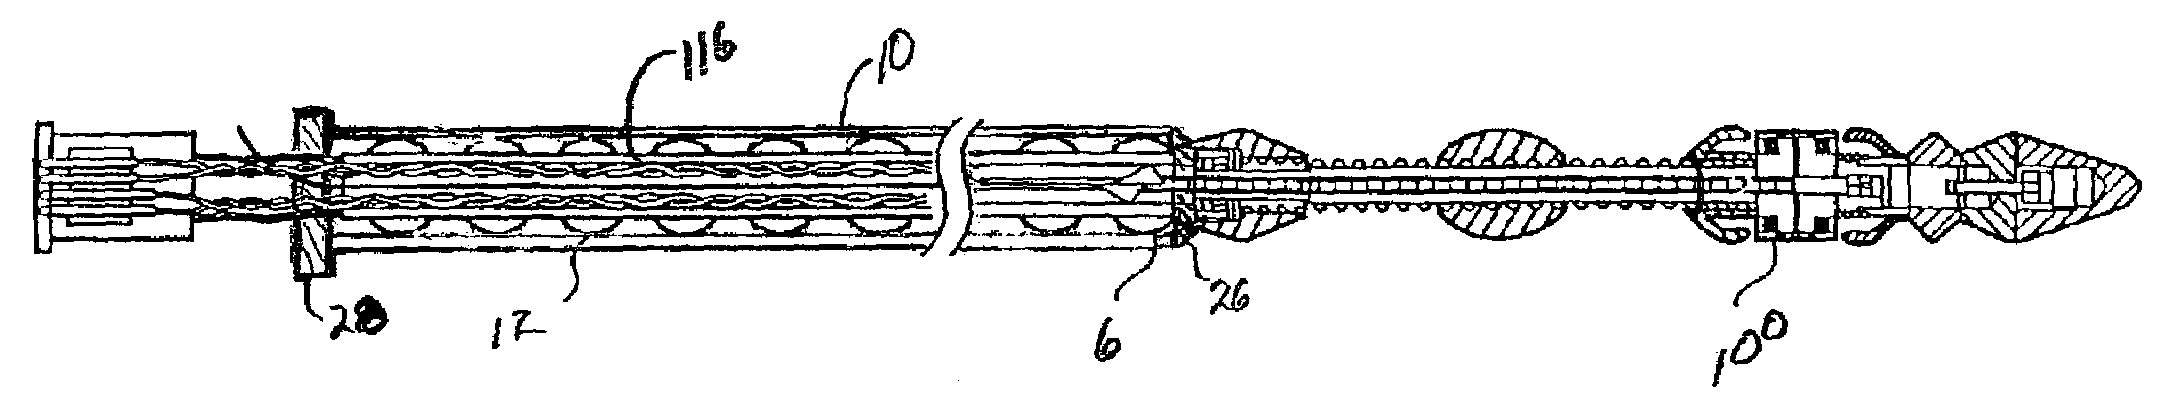 Flexible shaft with a helically wound data cable supporting a smooth outer sleeve for eddy current probe